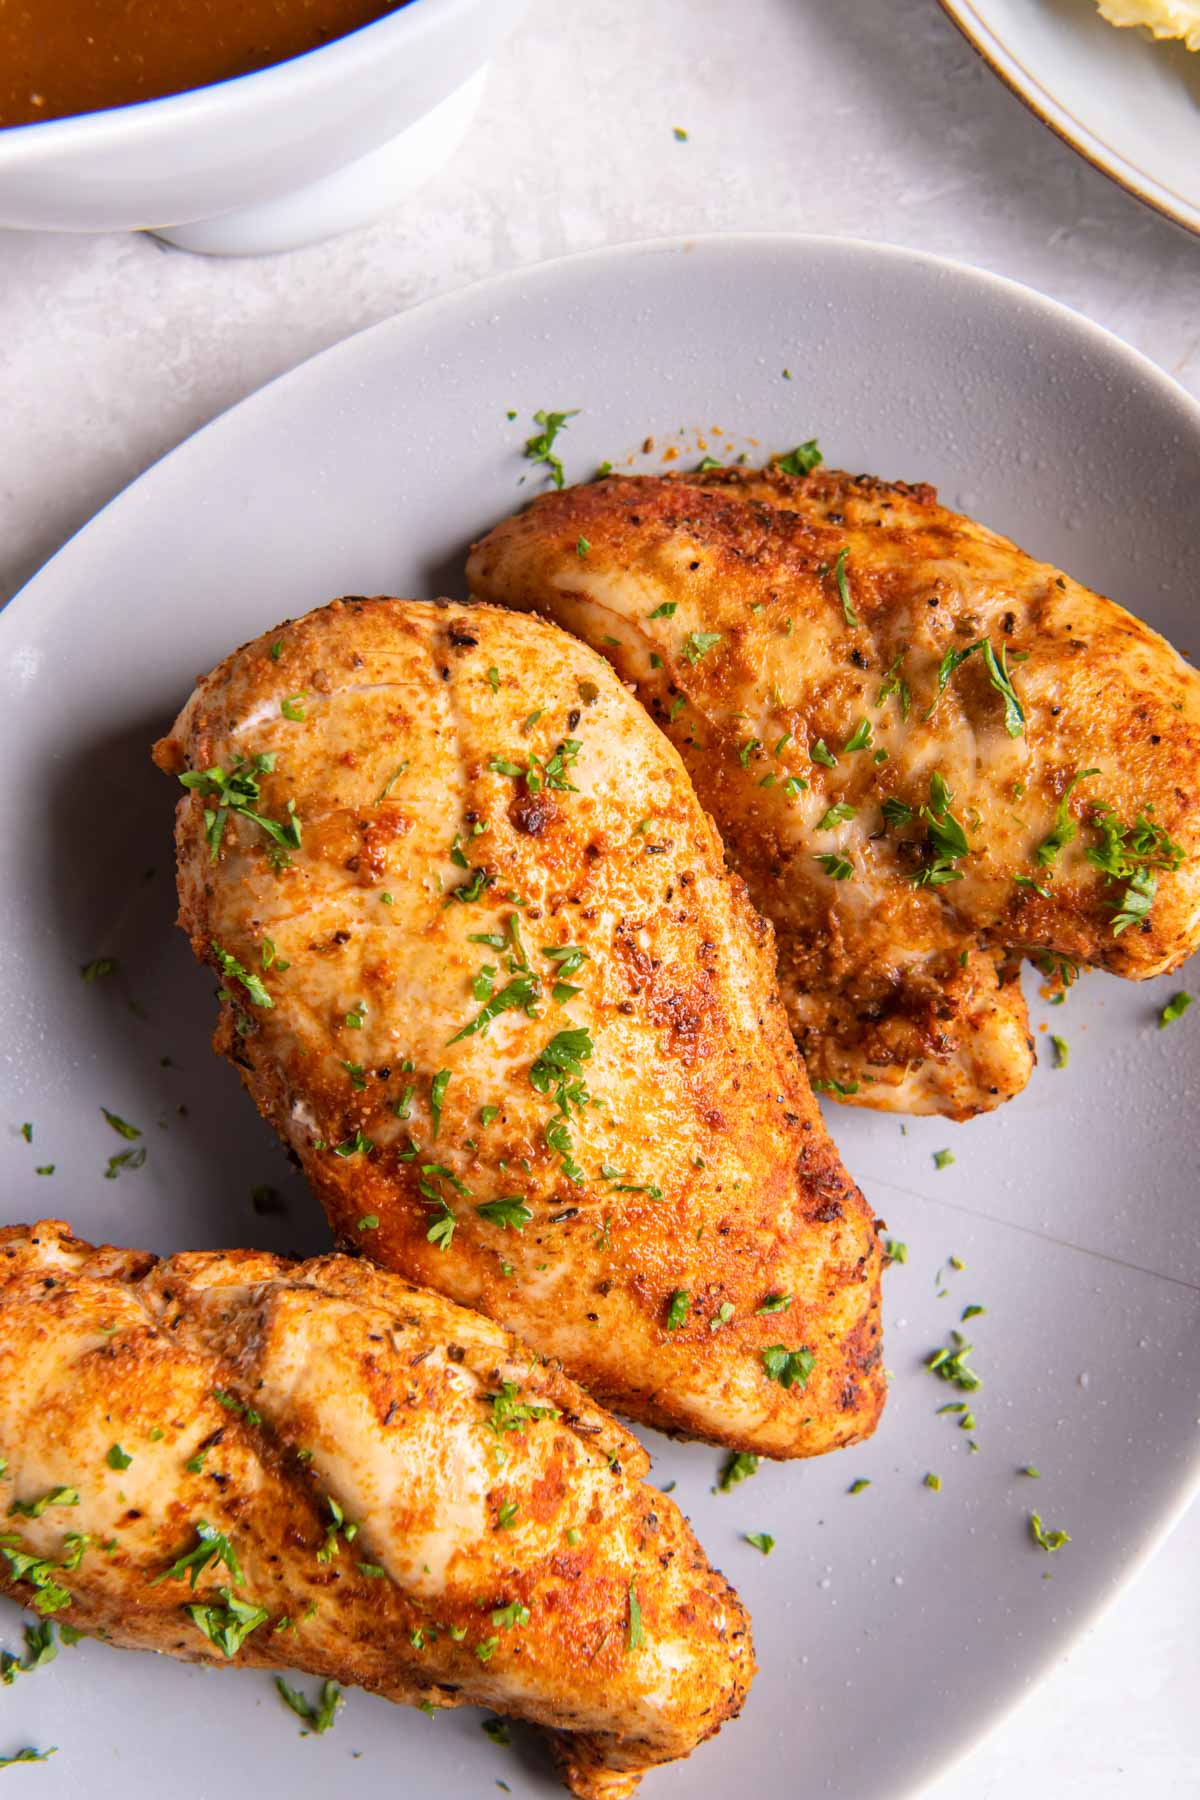 Three cooked chicken breasts on a plate.